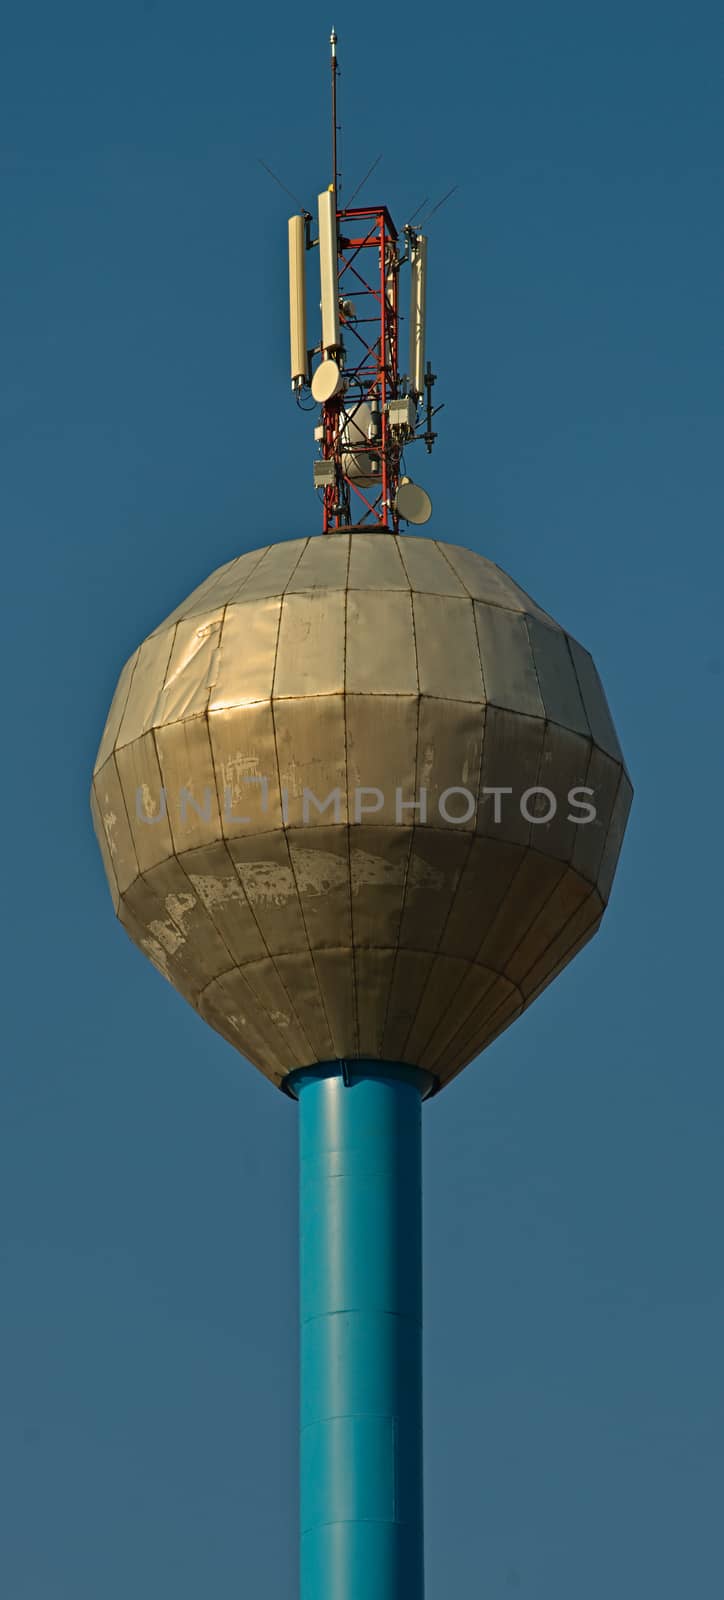 Water tower with antennas on top of it by sheriffkule